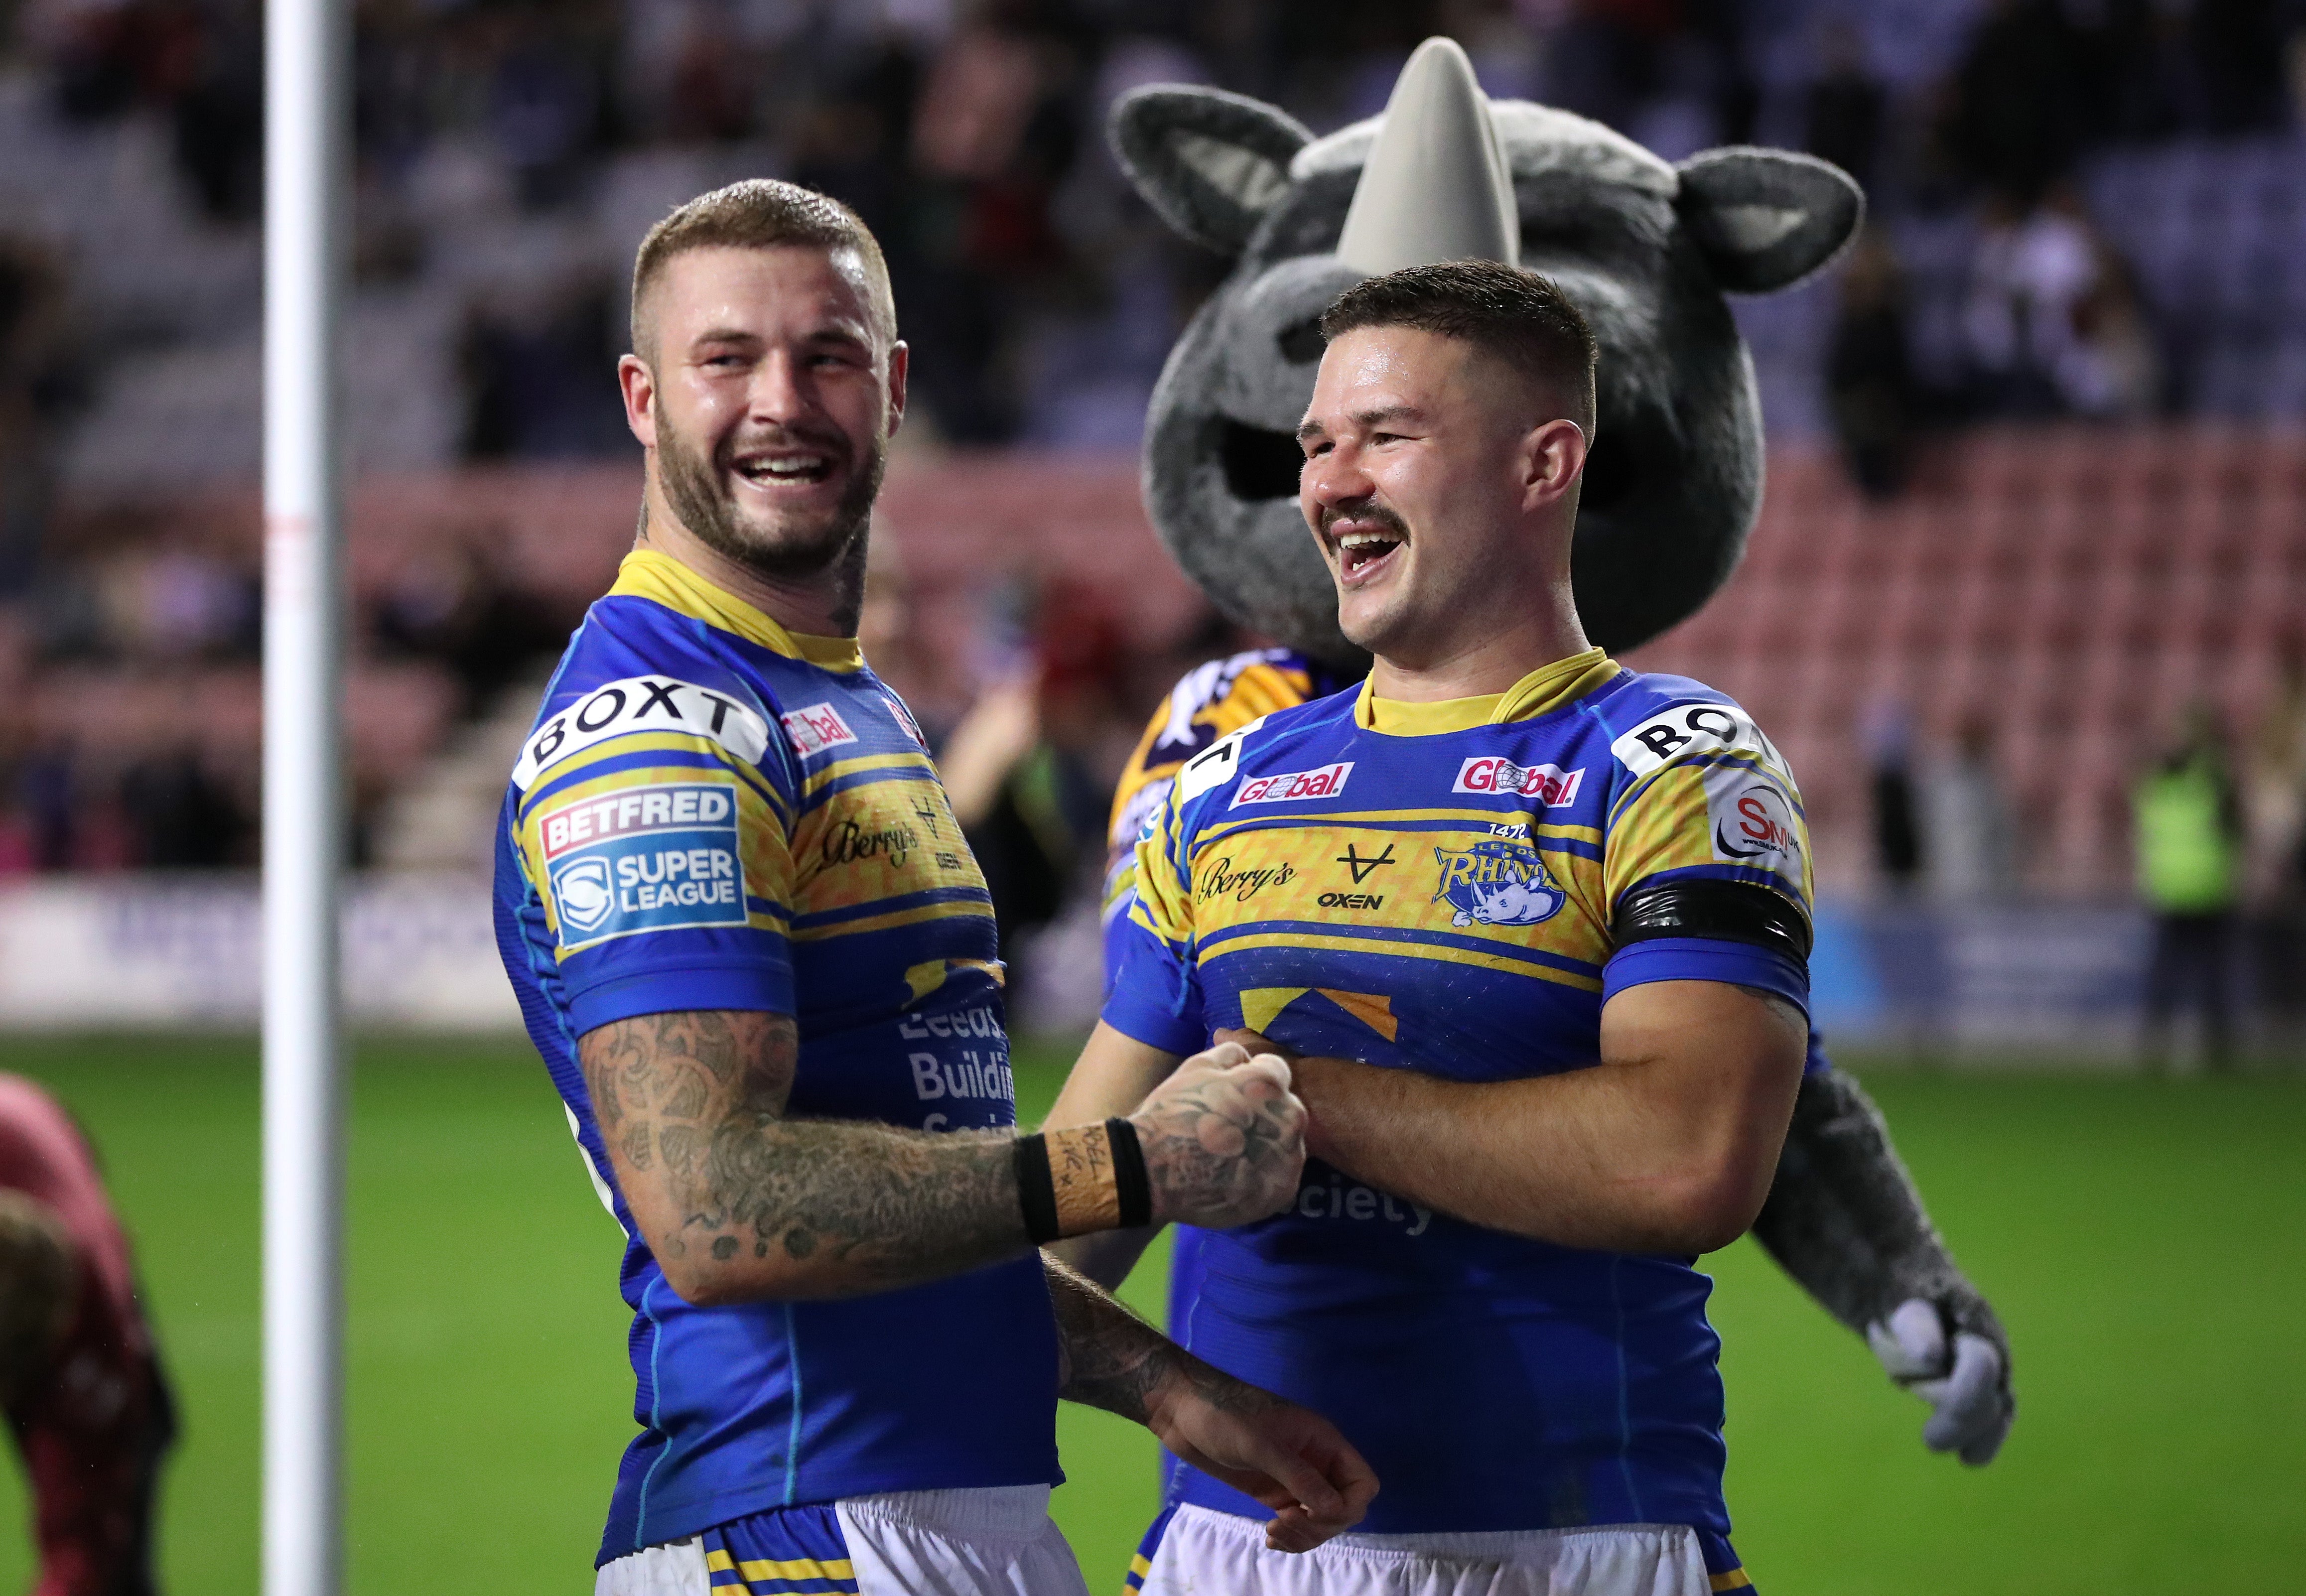 The Leeds Rhinos second rower (right) will line up against St Helens at Old Trafford on Saturday